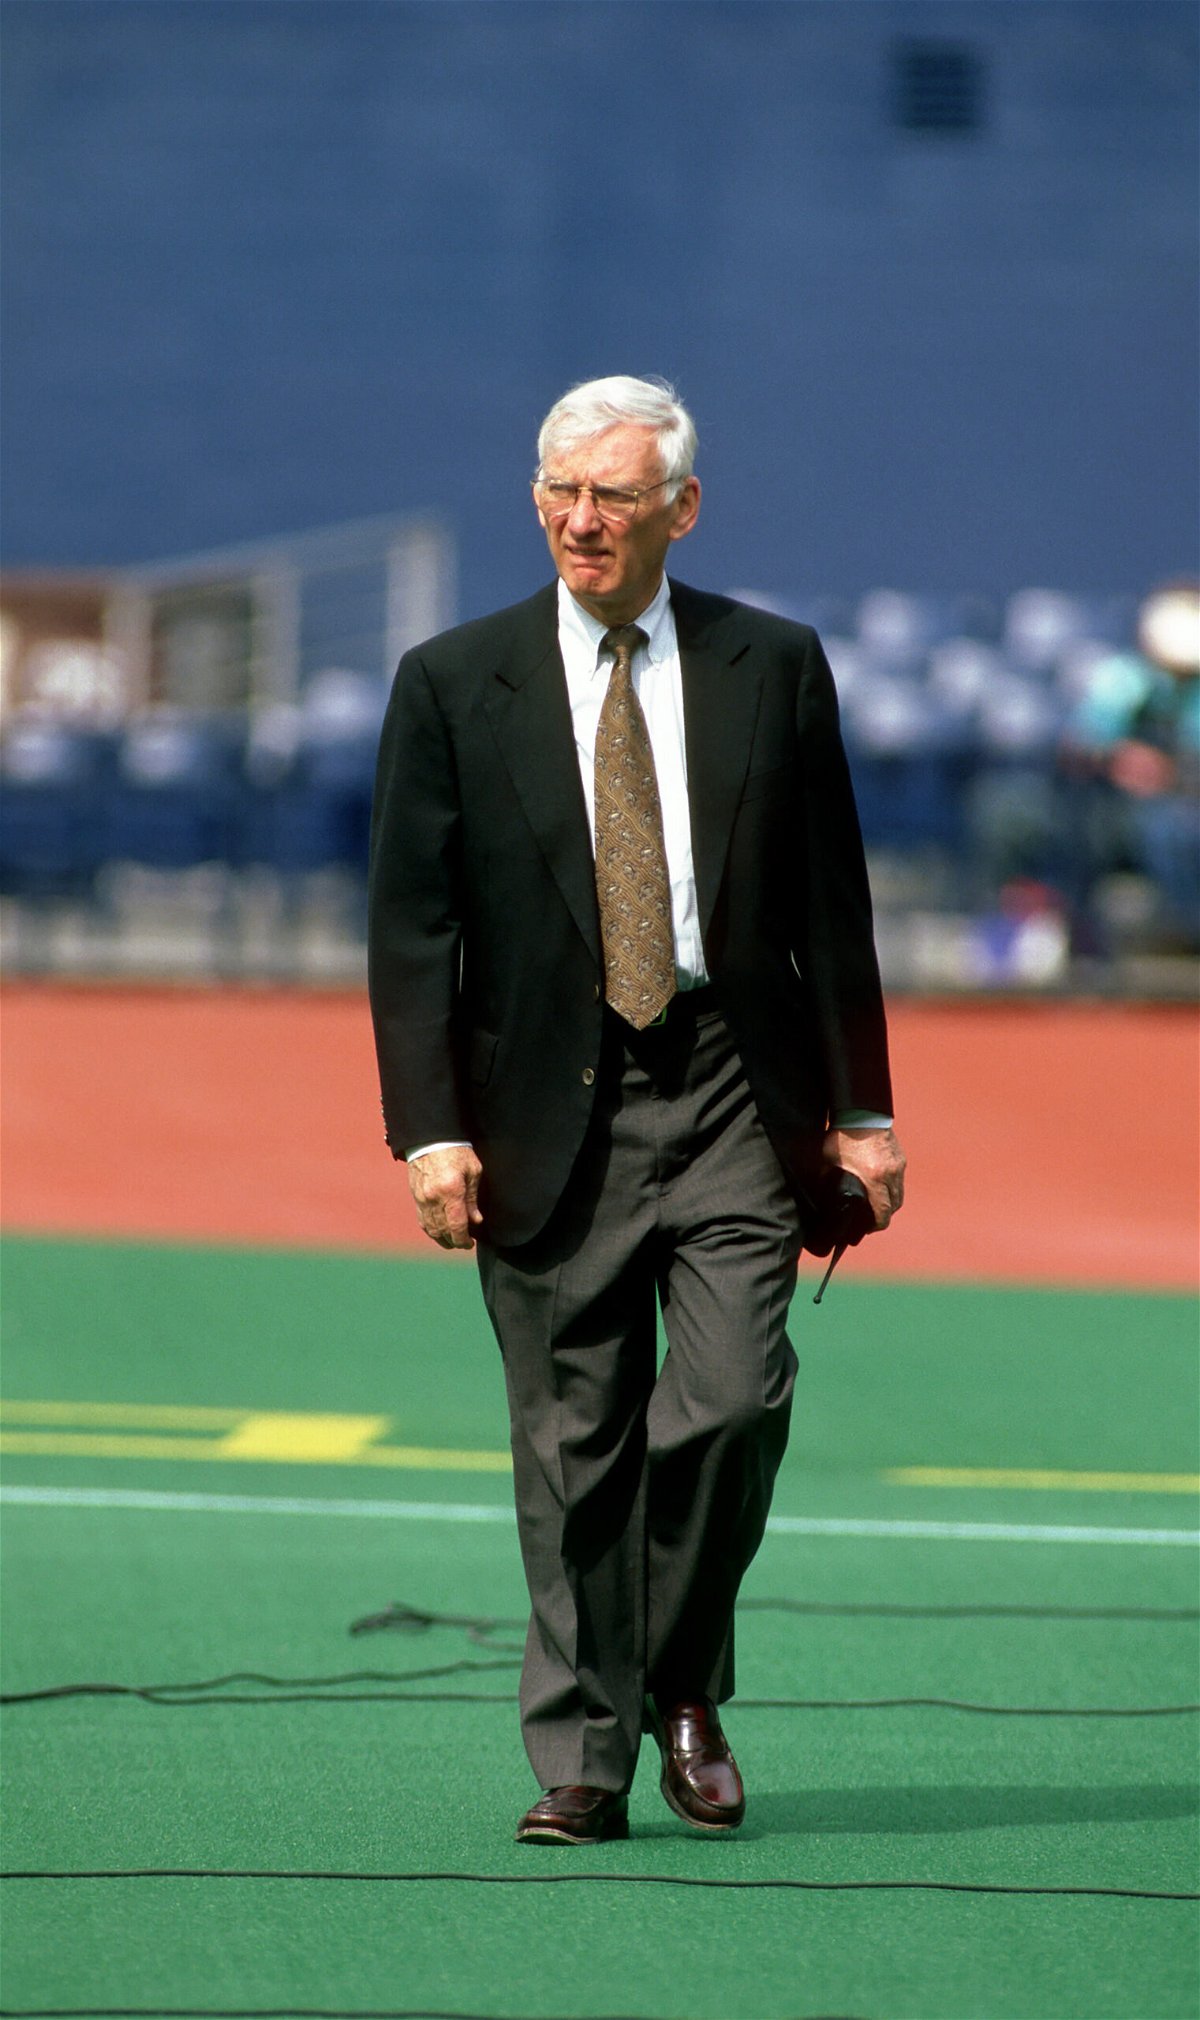 <i>George Gojkovich/Getty Images</i><br/>A diversity committee headed by Dan Rooney initiated the Rooney Rule in 2003.